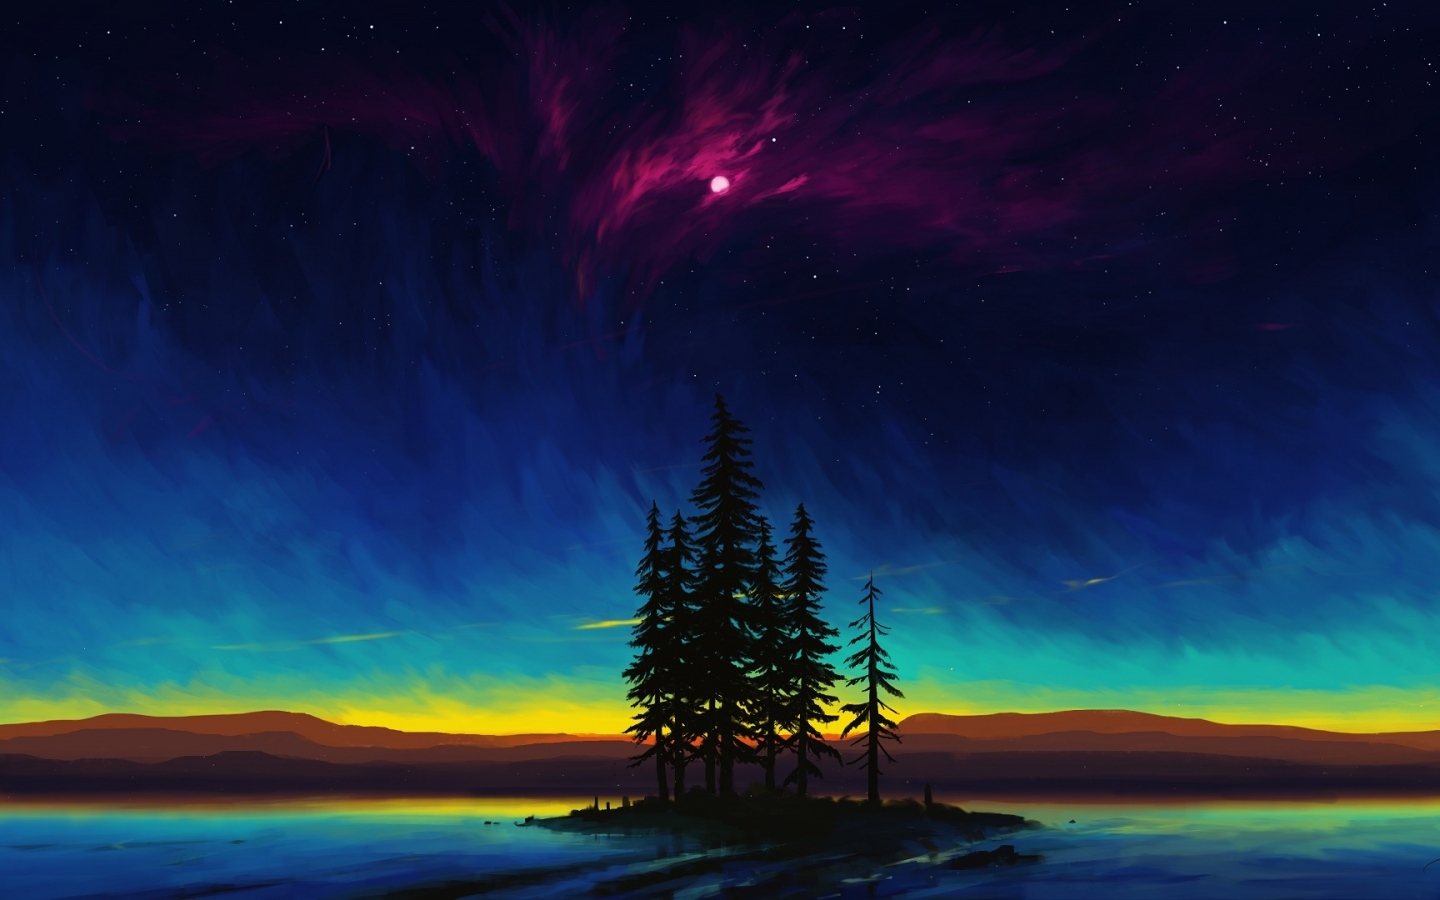 water, mountains, trees, sky, night, nature, drawings